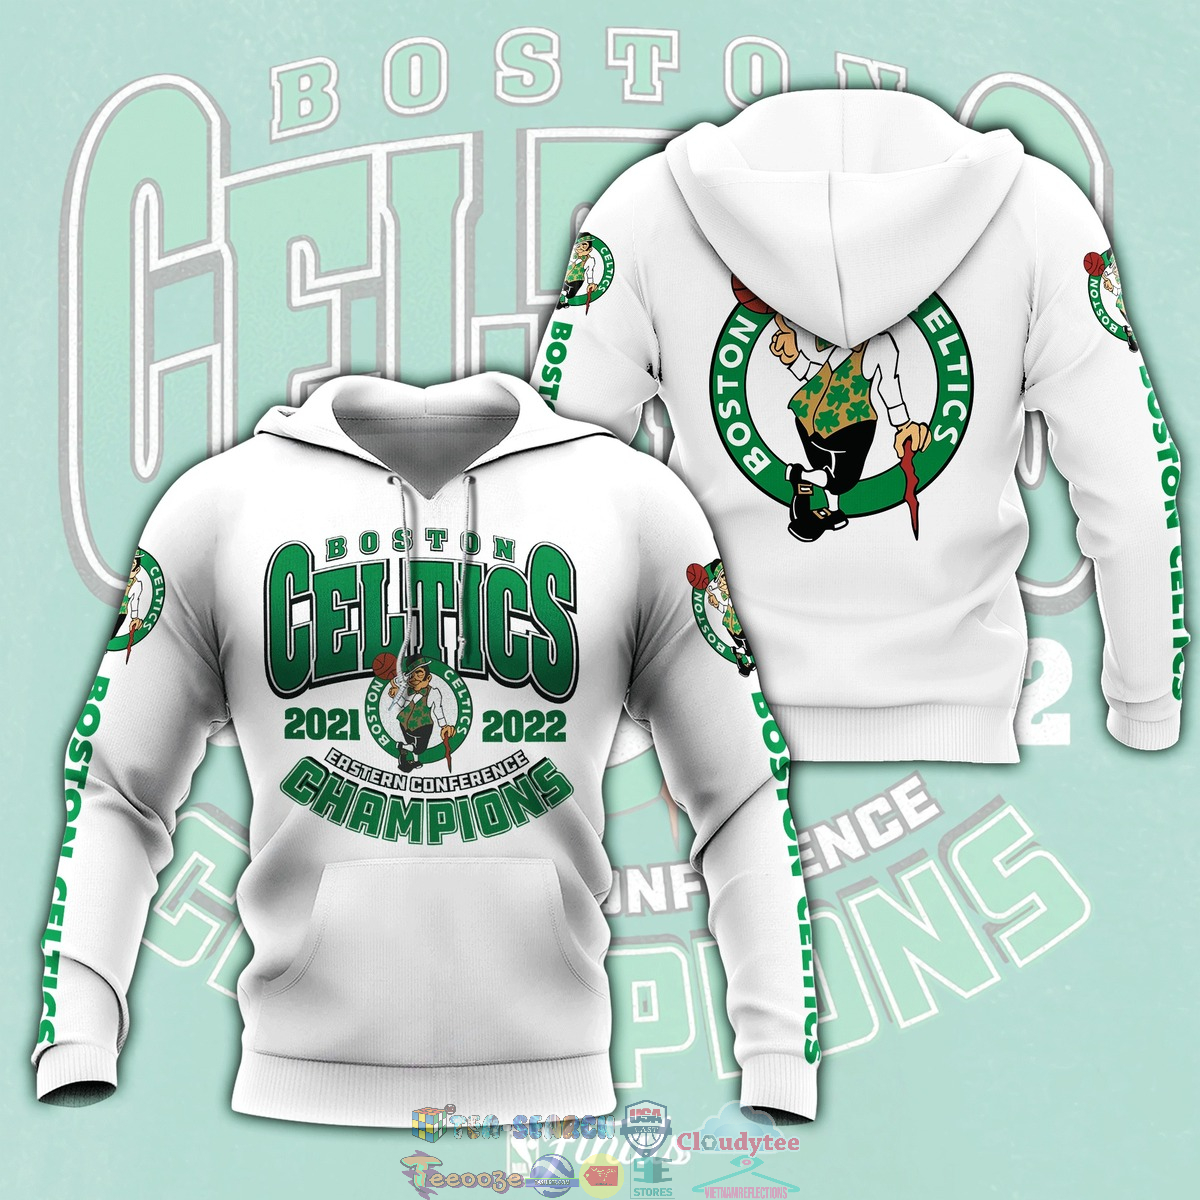 Boston Celtics 2021 2022 Eastern Conferrence Champions White 3D hoodie and t-shirt – Saleoff